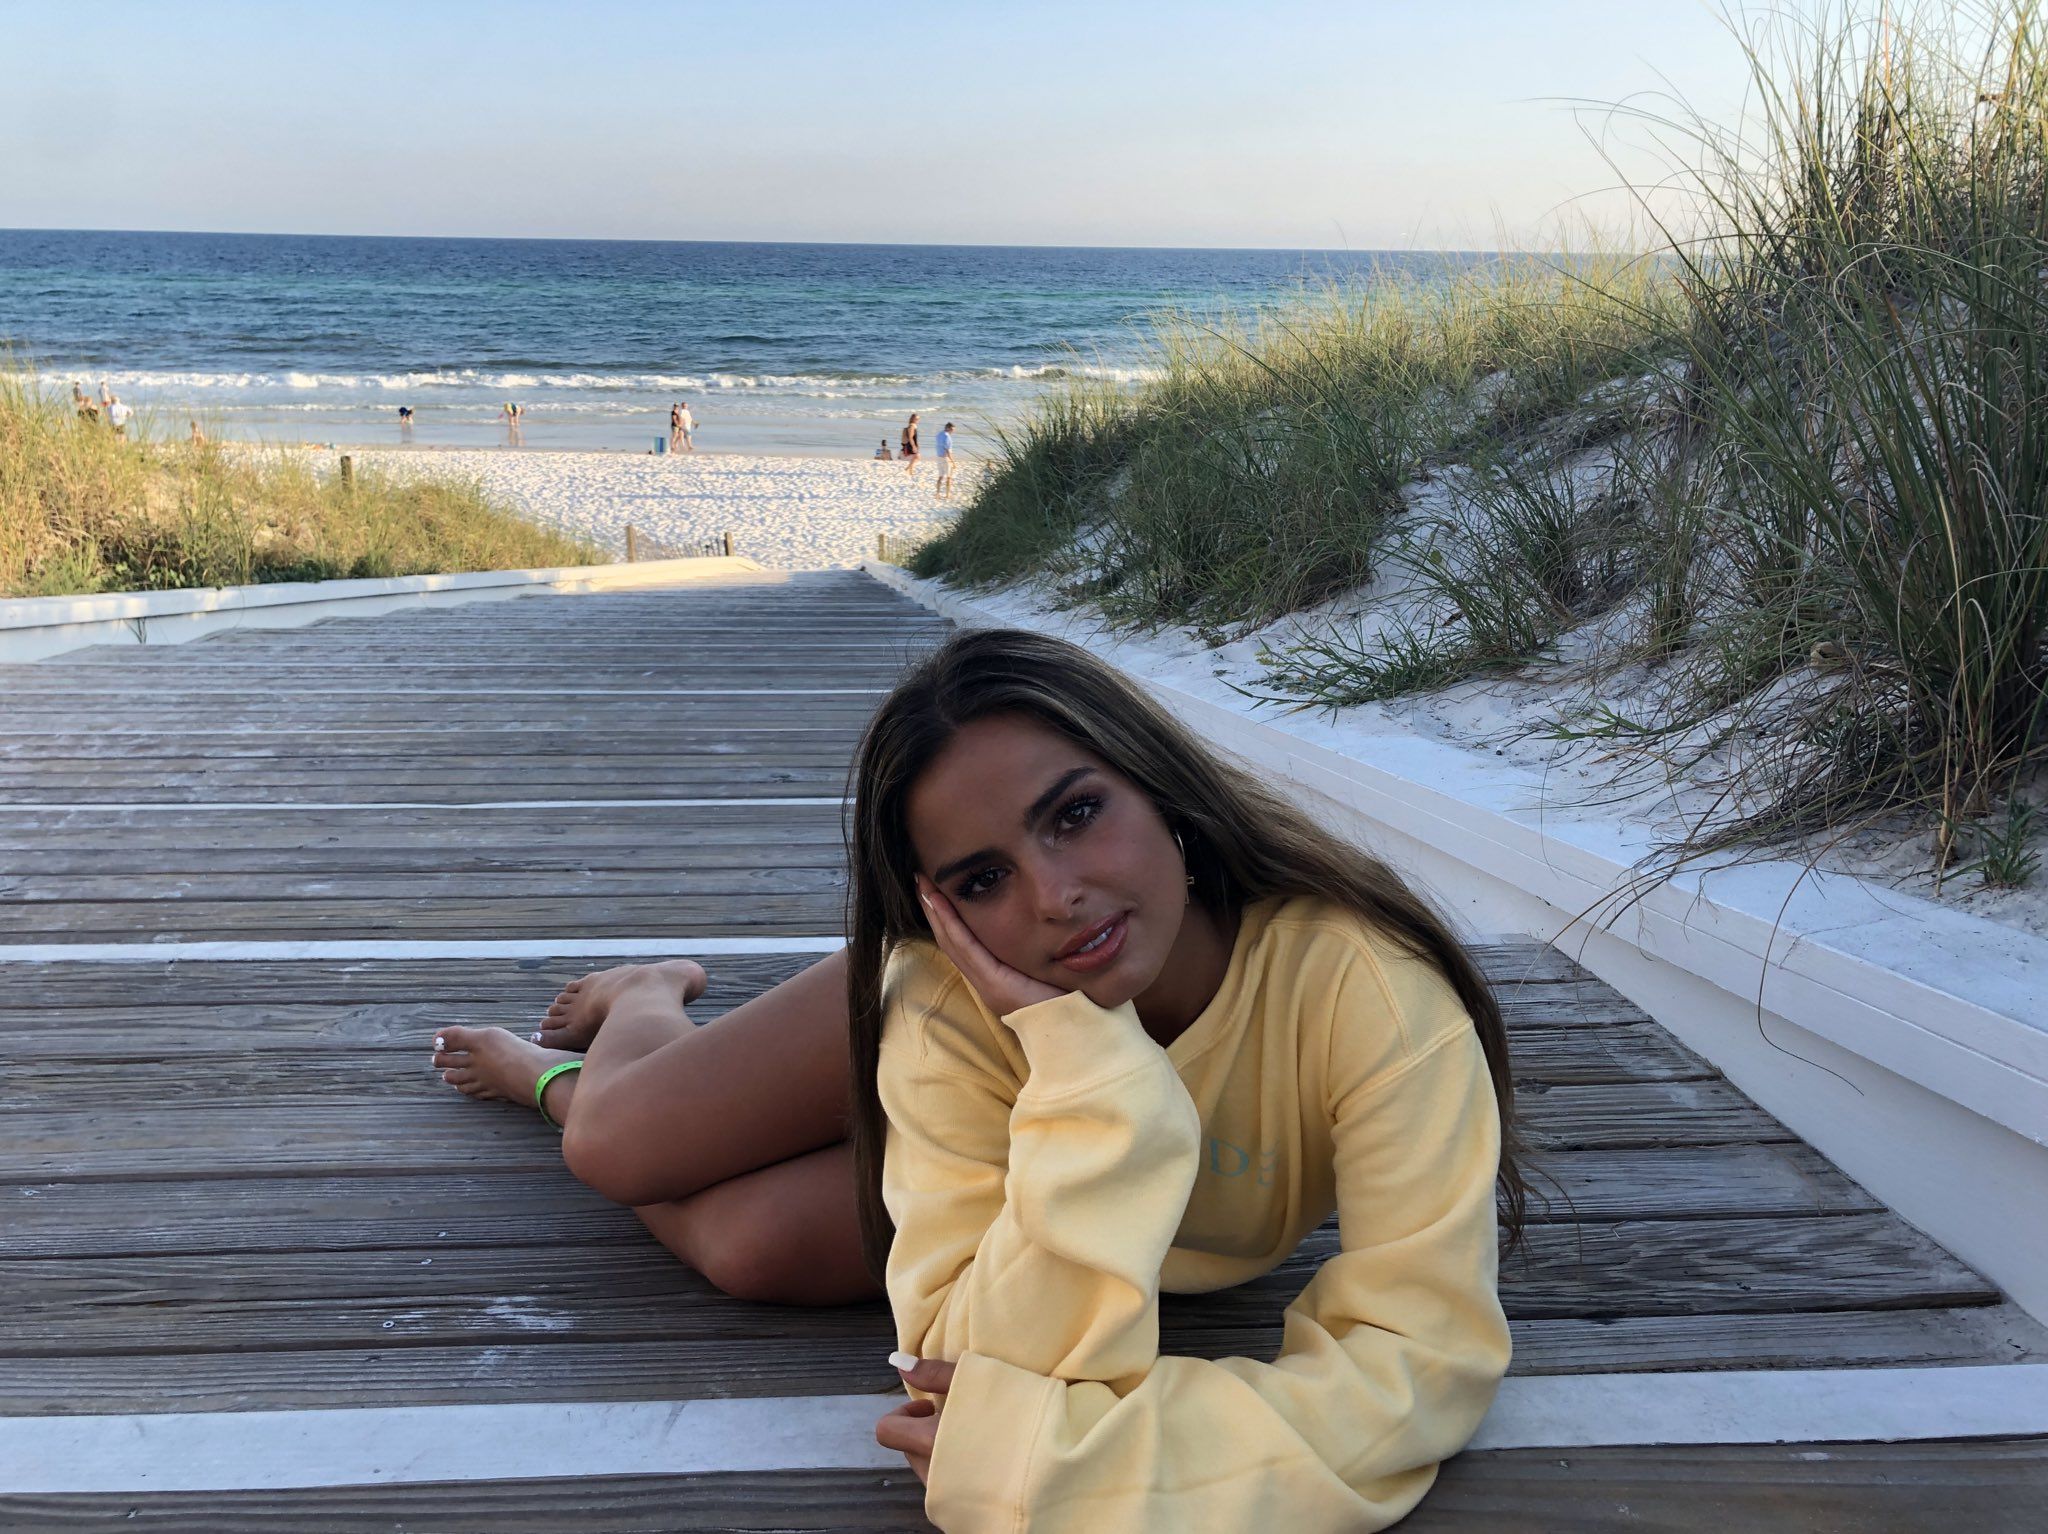 Addison Rae 2019 was one of the best <3 i wanna go lay on the beach right now